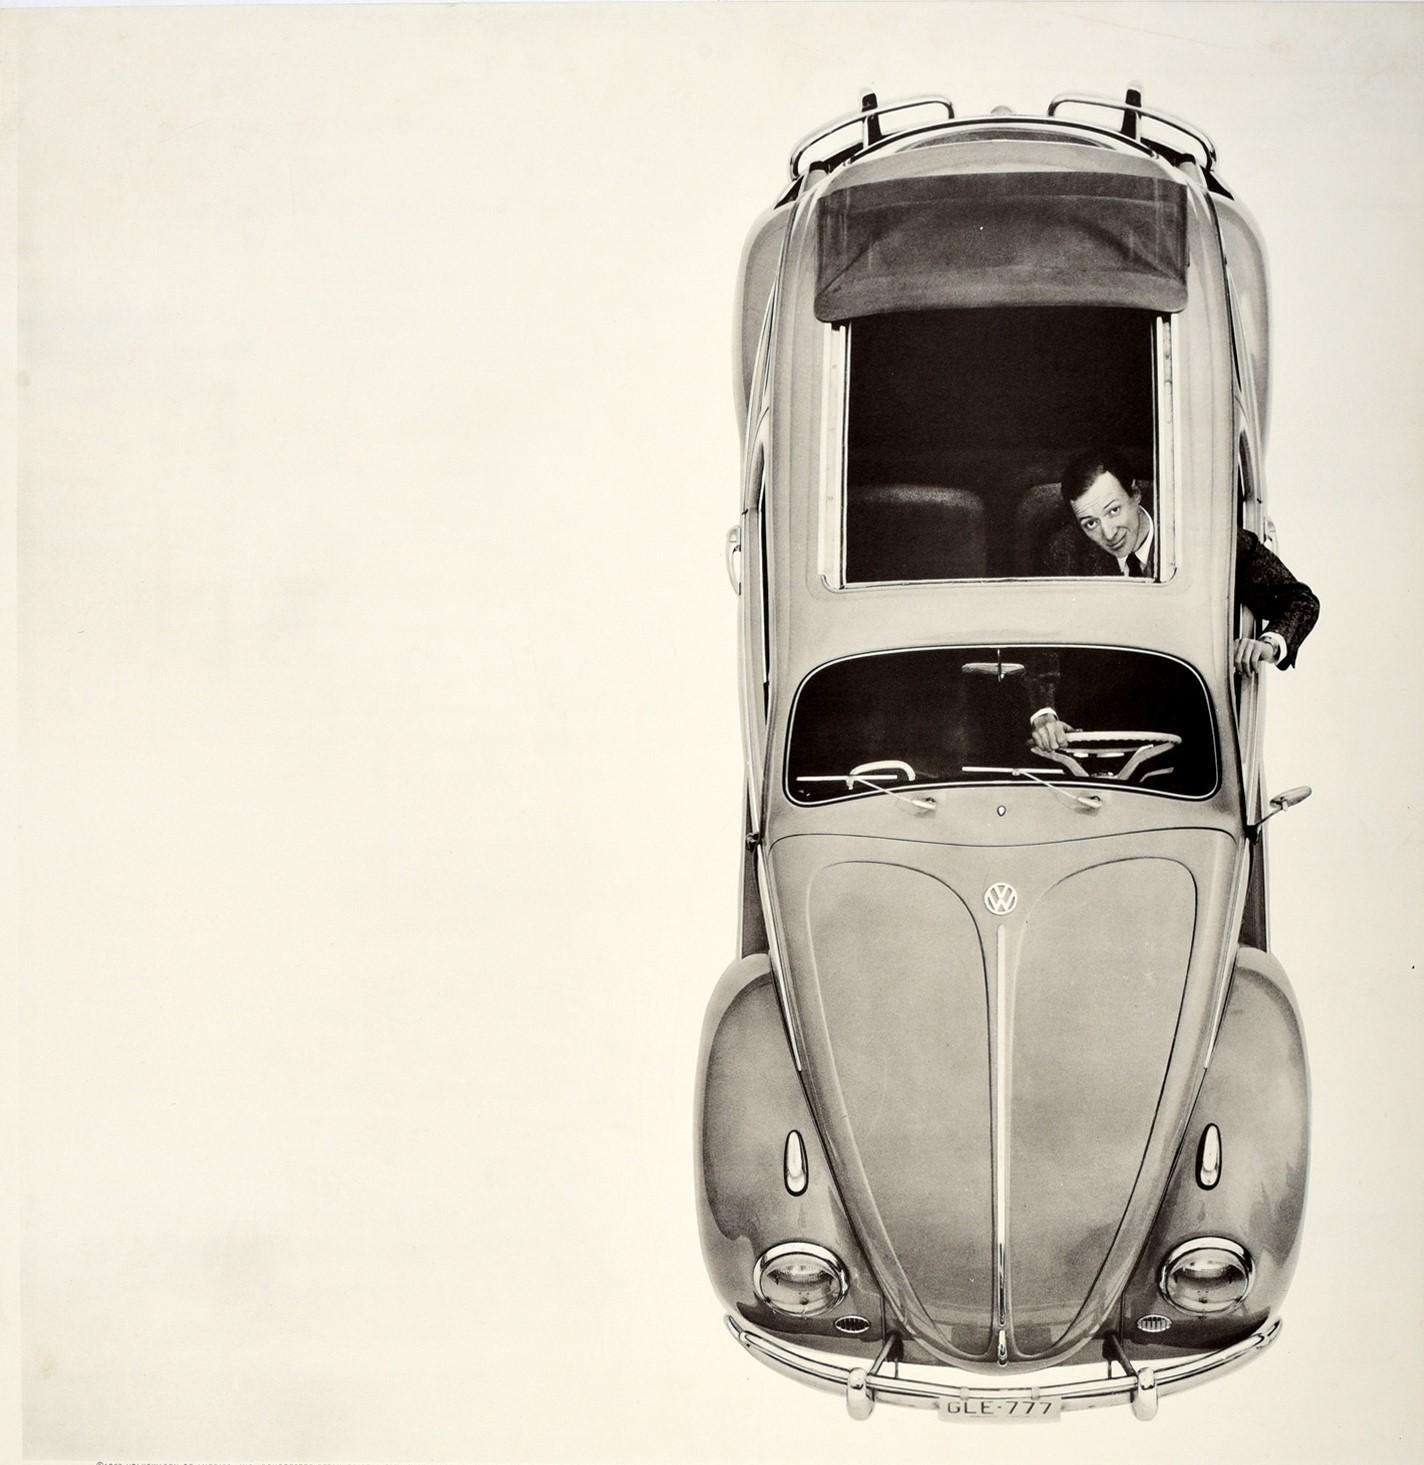 Original vintage car dealer showroom advertising poster for Volkswagen Beetle - Our most expensive option: A hole in the roof - featuring a great design showing a smartly dressed man wearing a suit and looking up to the viewer through the open sun